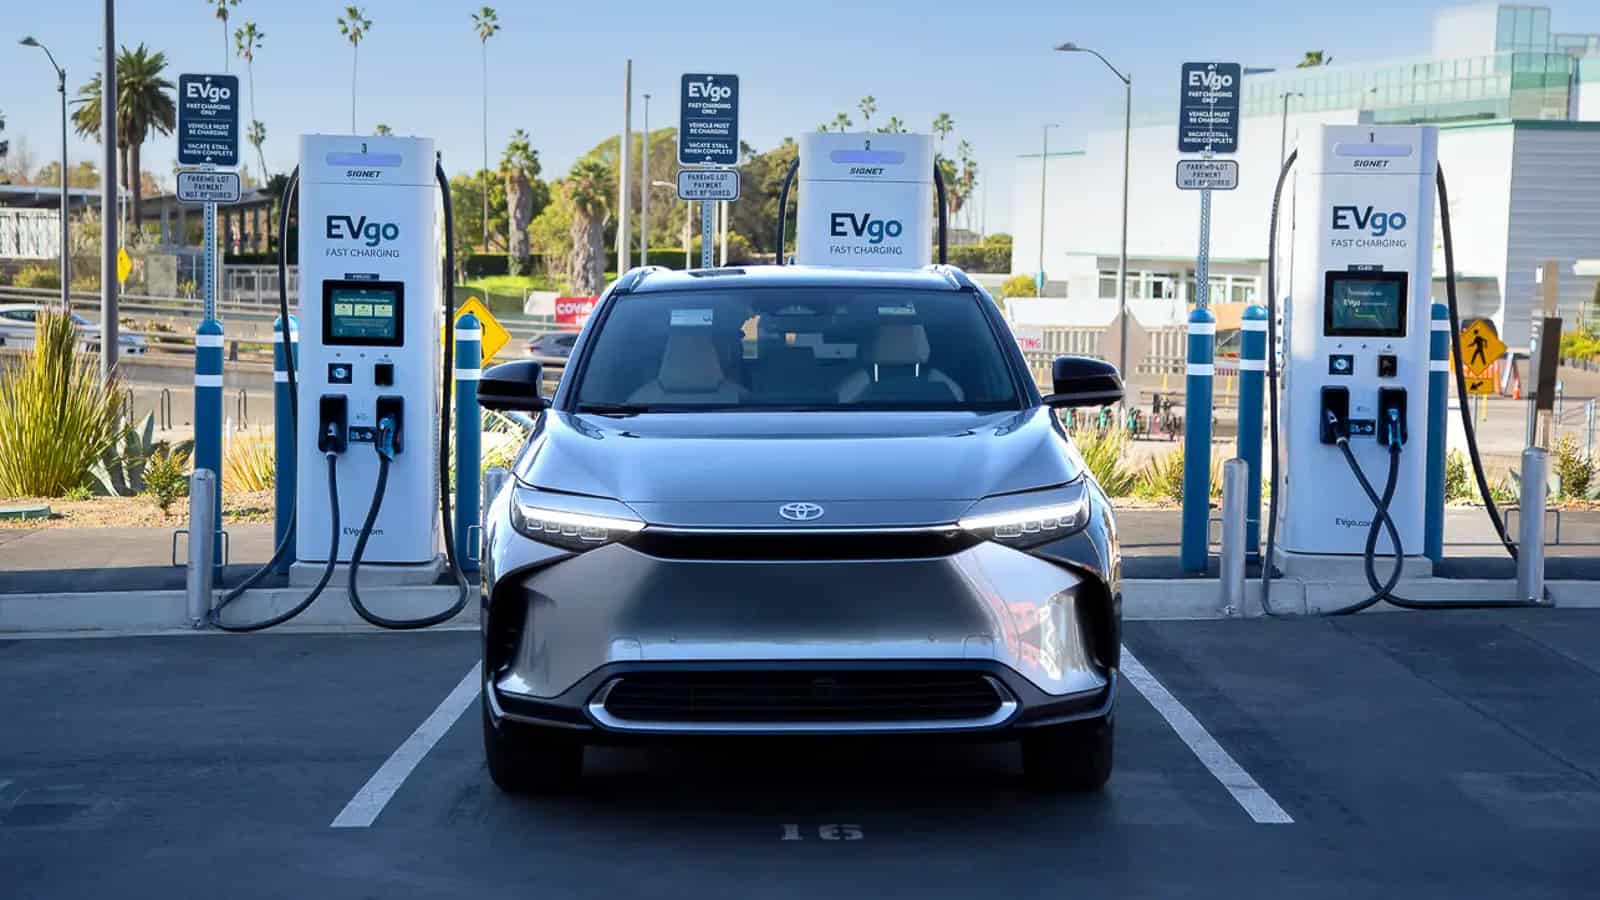 Toyota bZ4X electric SUV at EVgo fast charging station